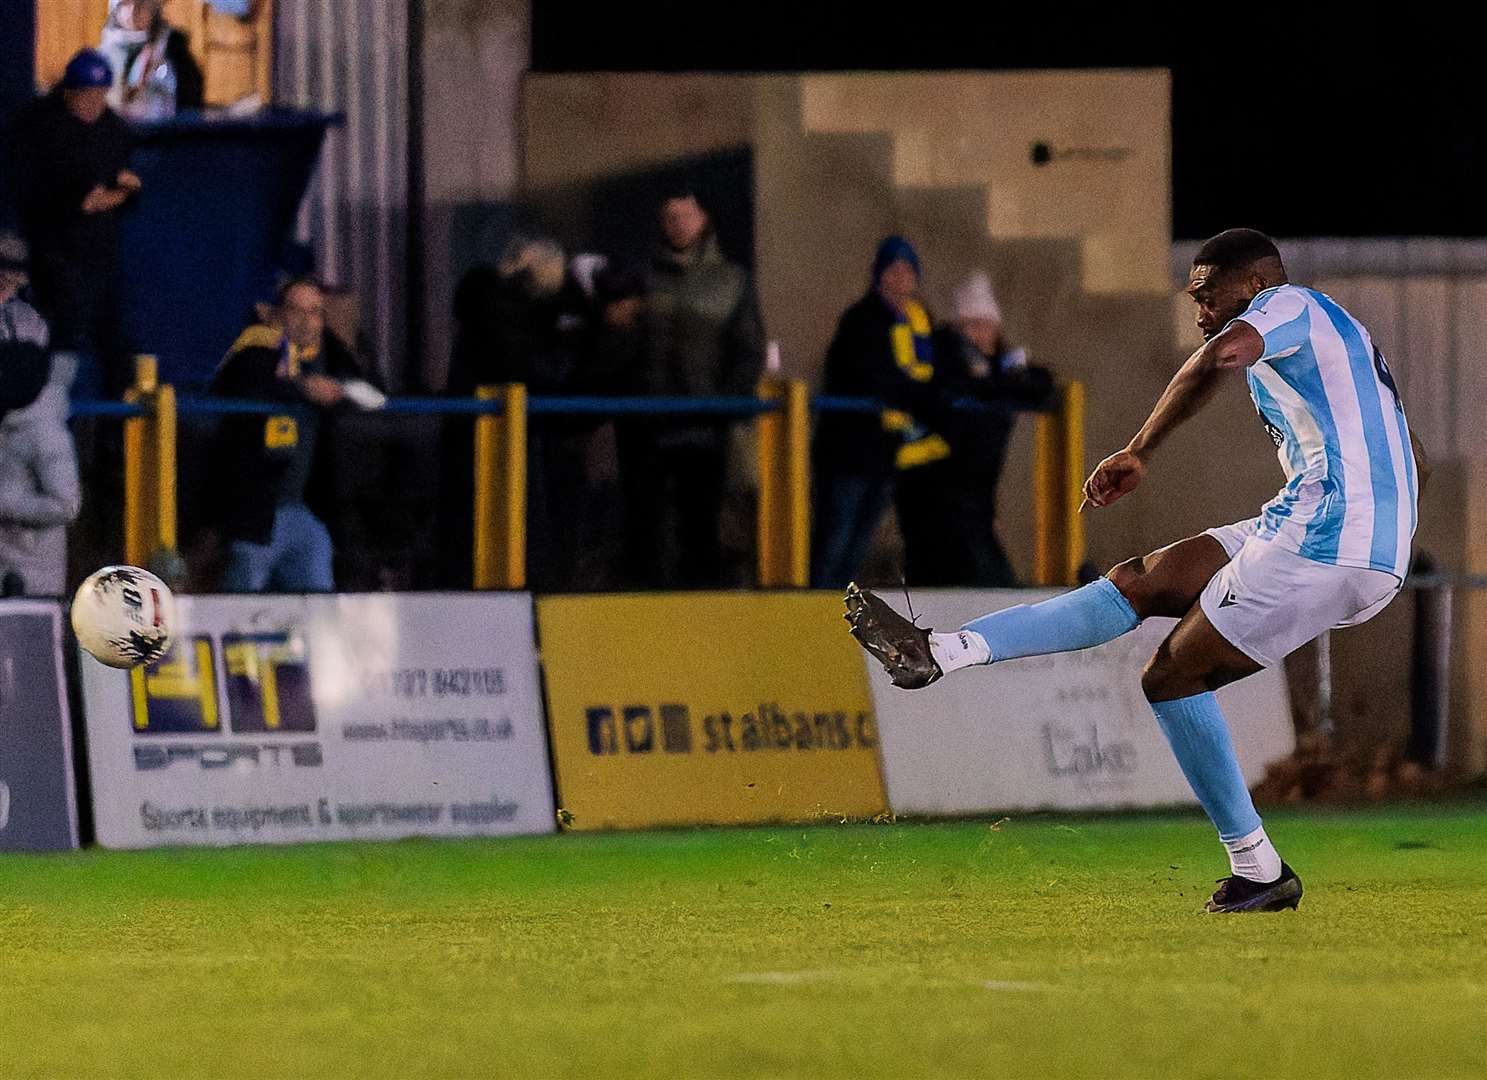 Paul Appiah picks his pass at St Albans. Picture: Helen Cooper